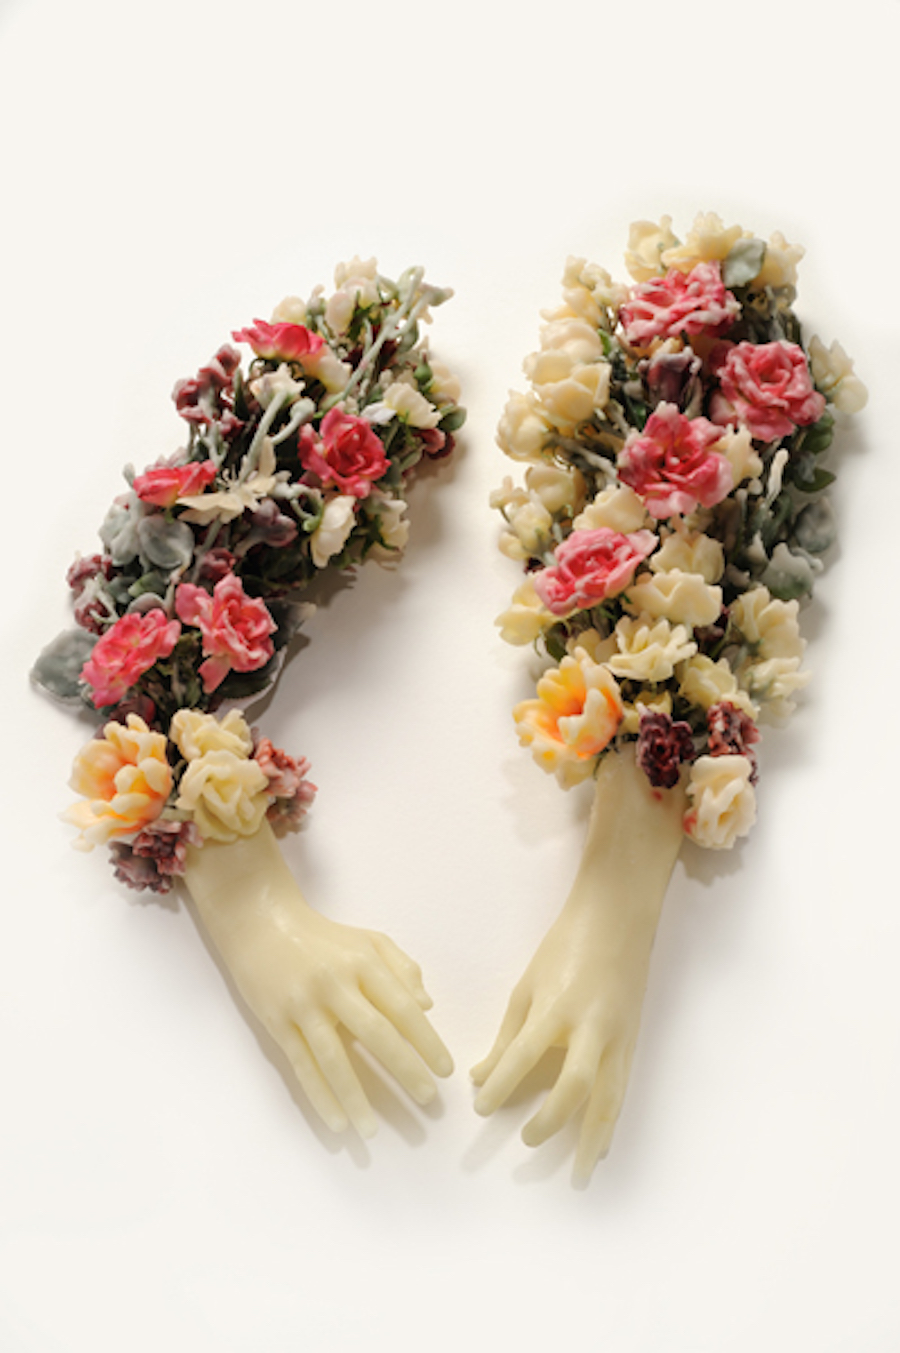 Surprising Floral Sculptures made of Wax2